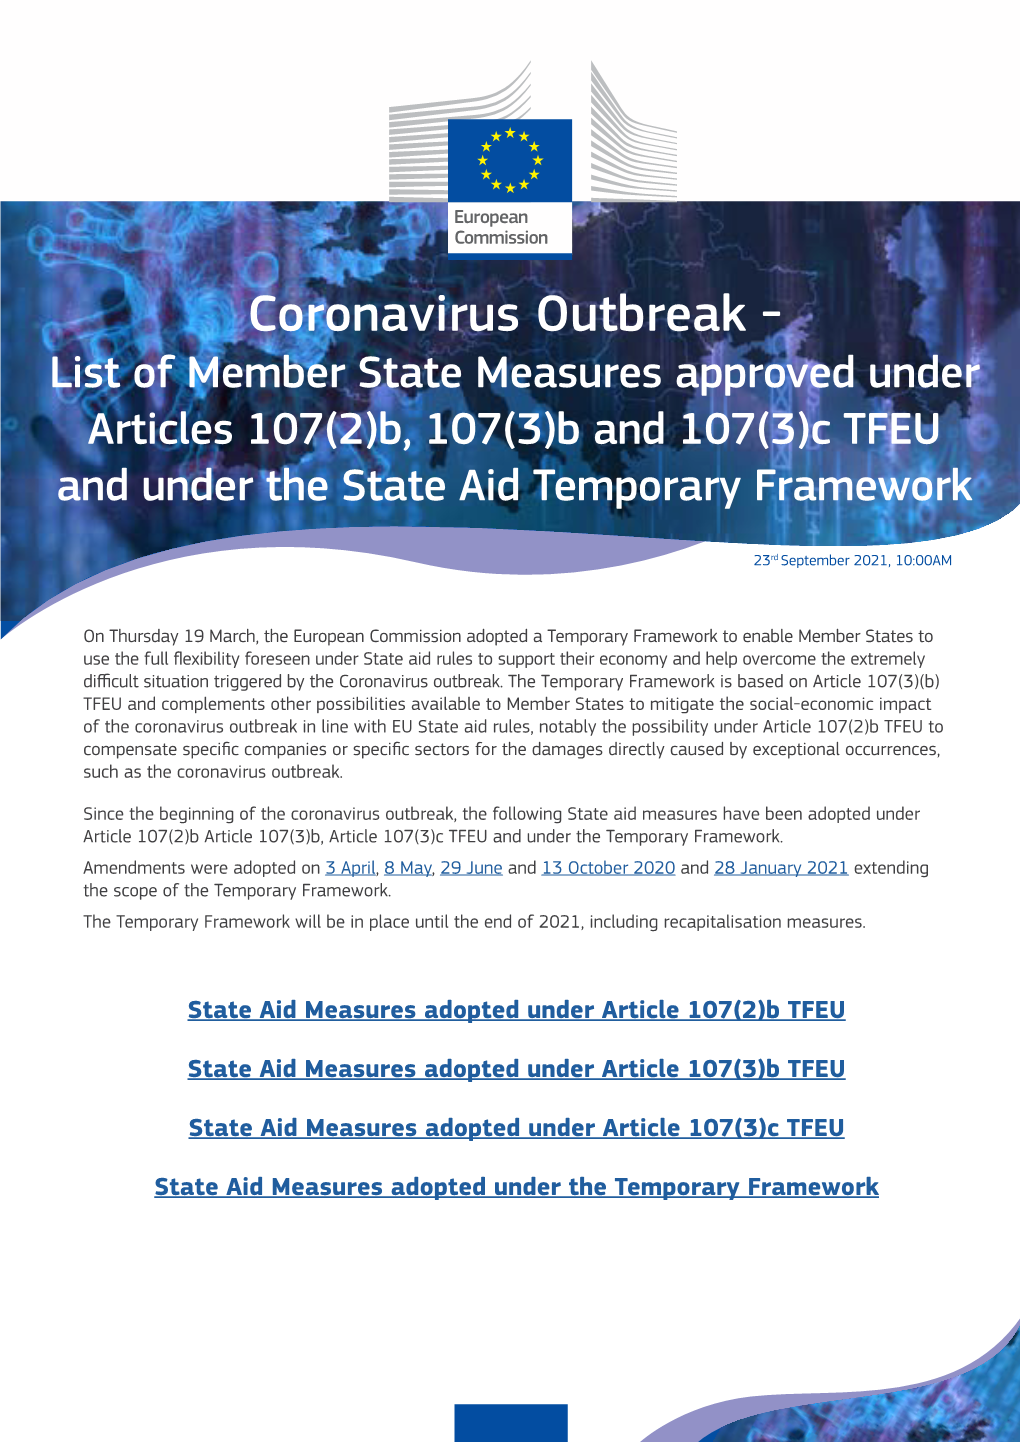 Coronavirus Outbreak - List of Member State Measures Approved Under Articles 107(2)B, 107(3)B and 107(3)C TFEU and Under the State Aid Temporary Framework